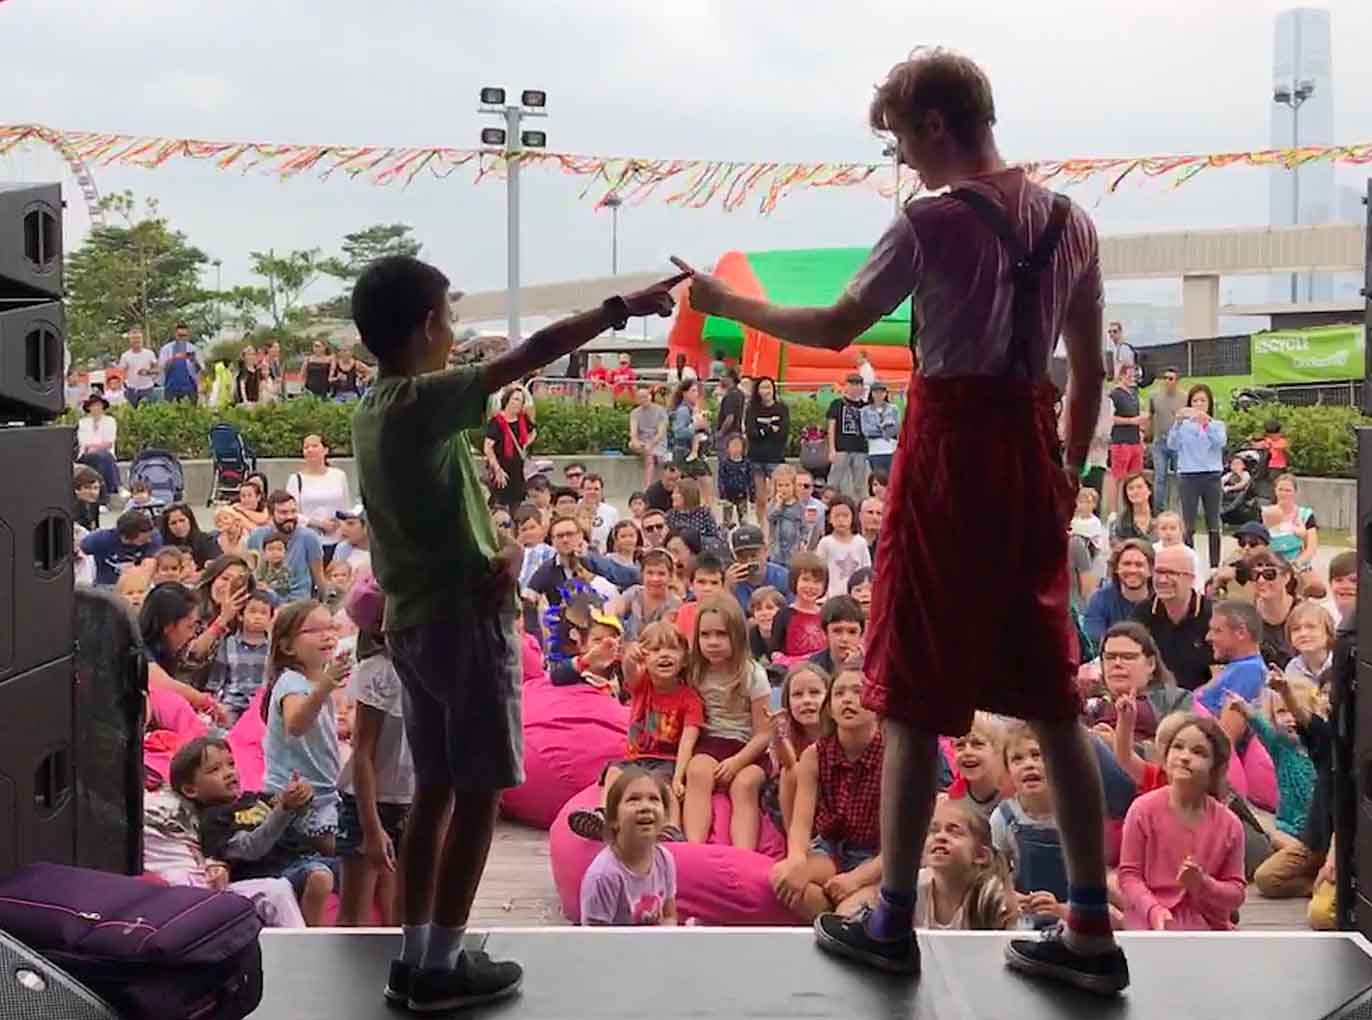 childrens entertainer interacting with audience during magic show